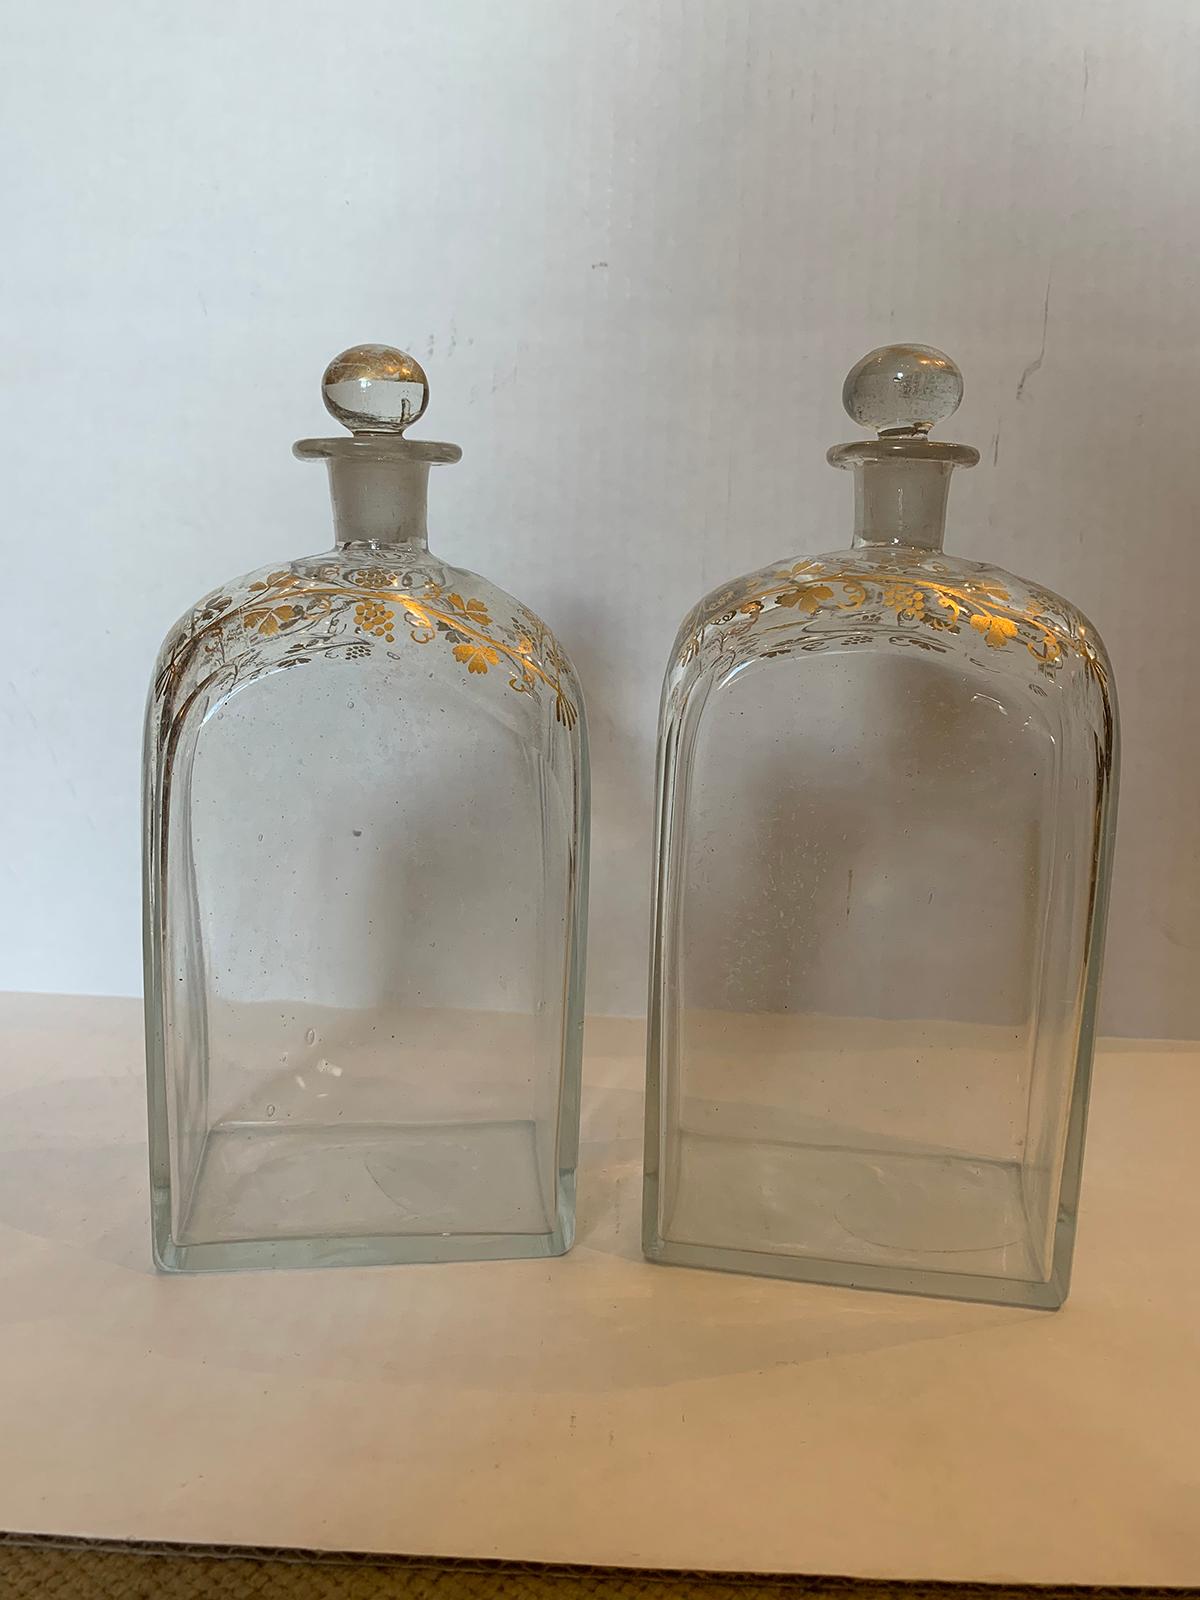 Pair of 18th century American glass decanters with gilt details.